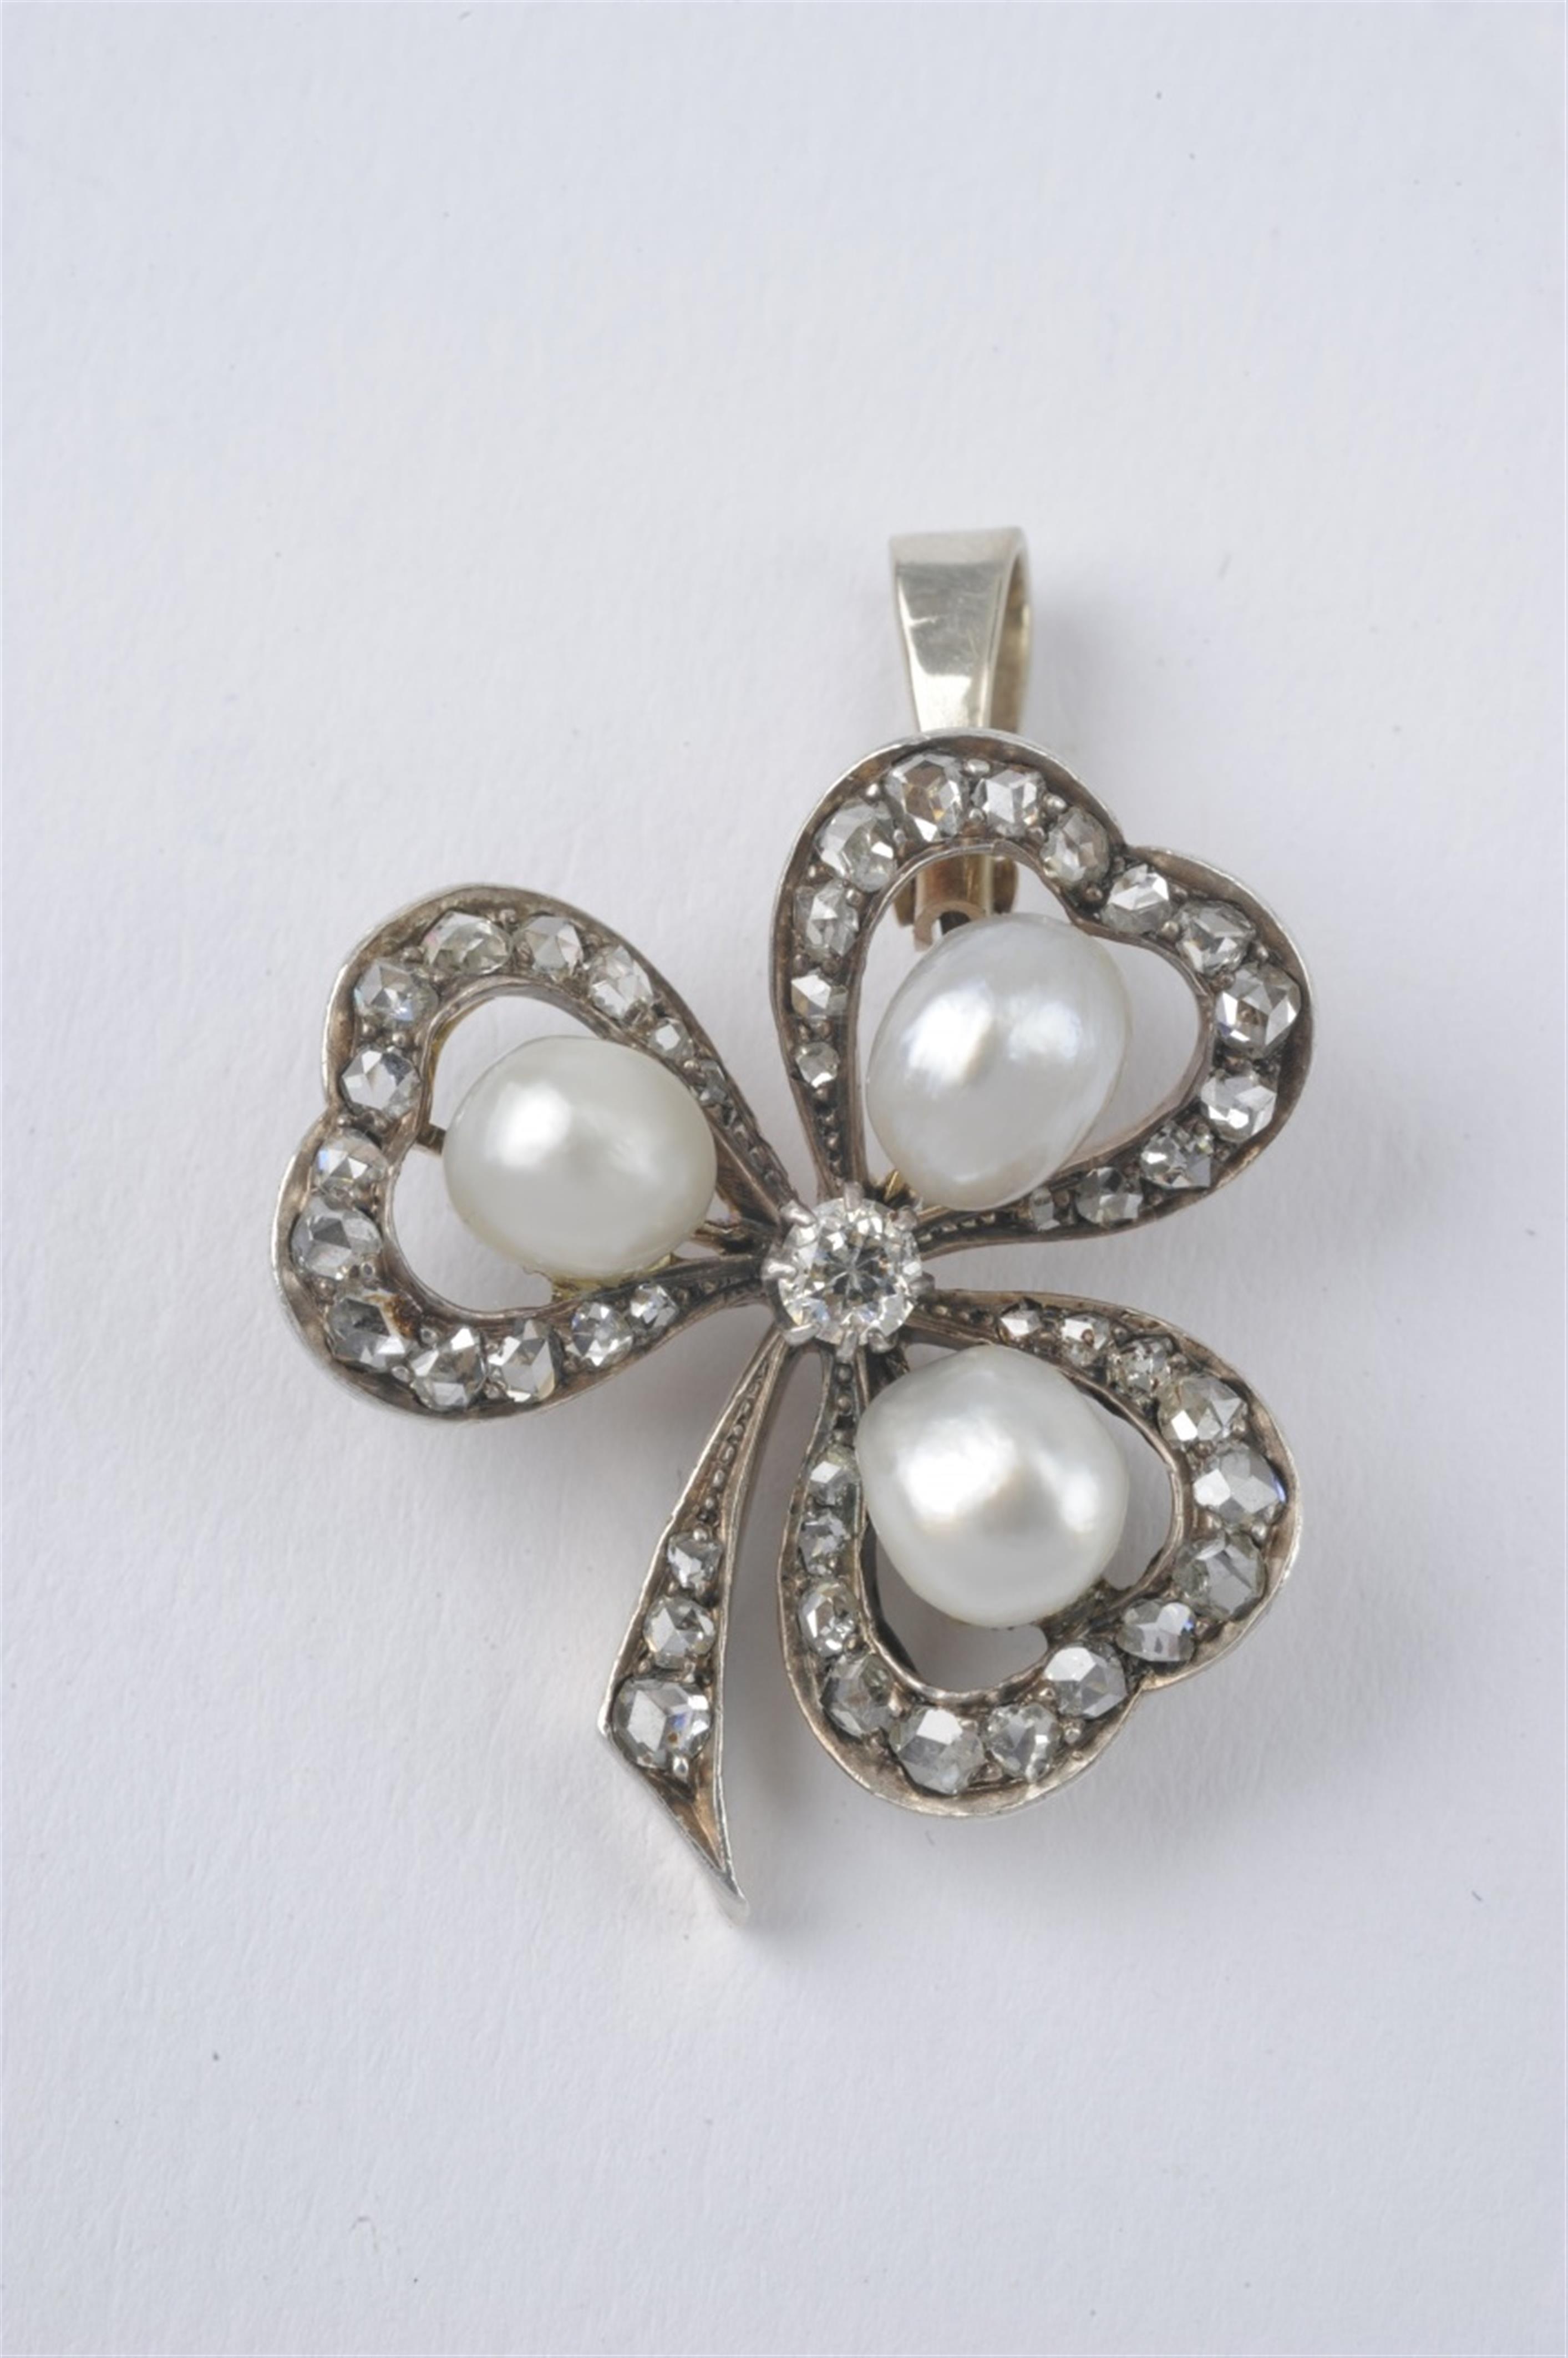 A 14k gold and silver clover leaf pendant - image-1